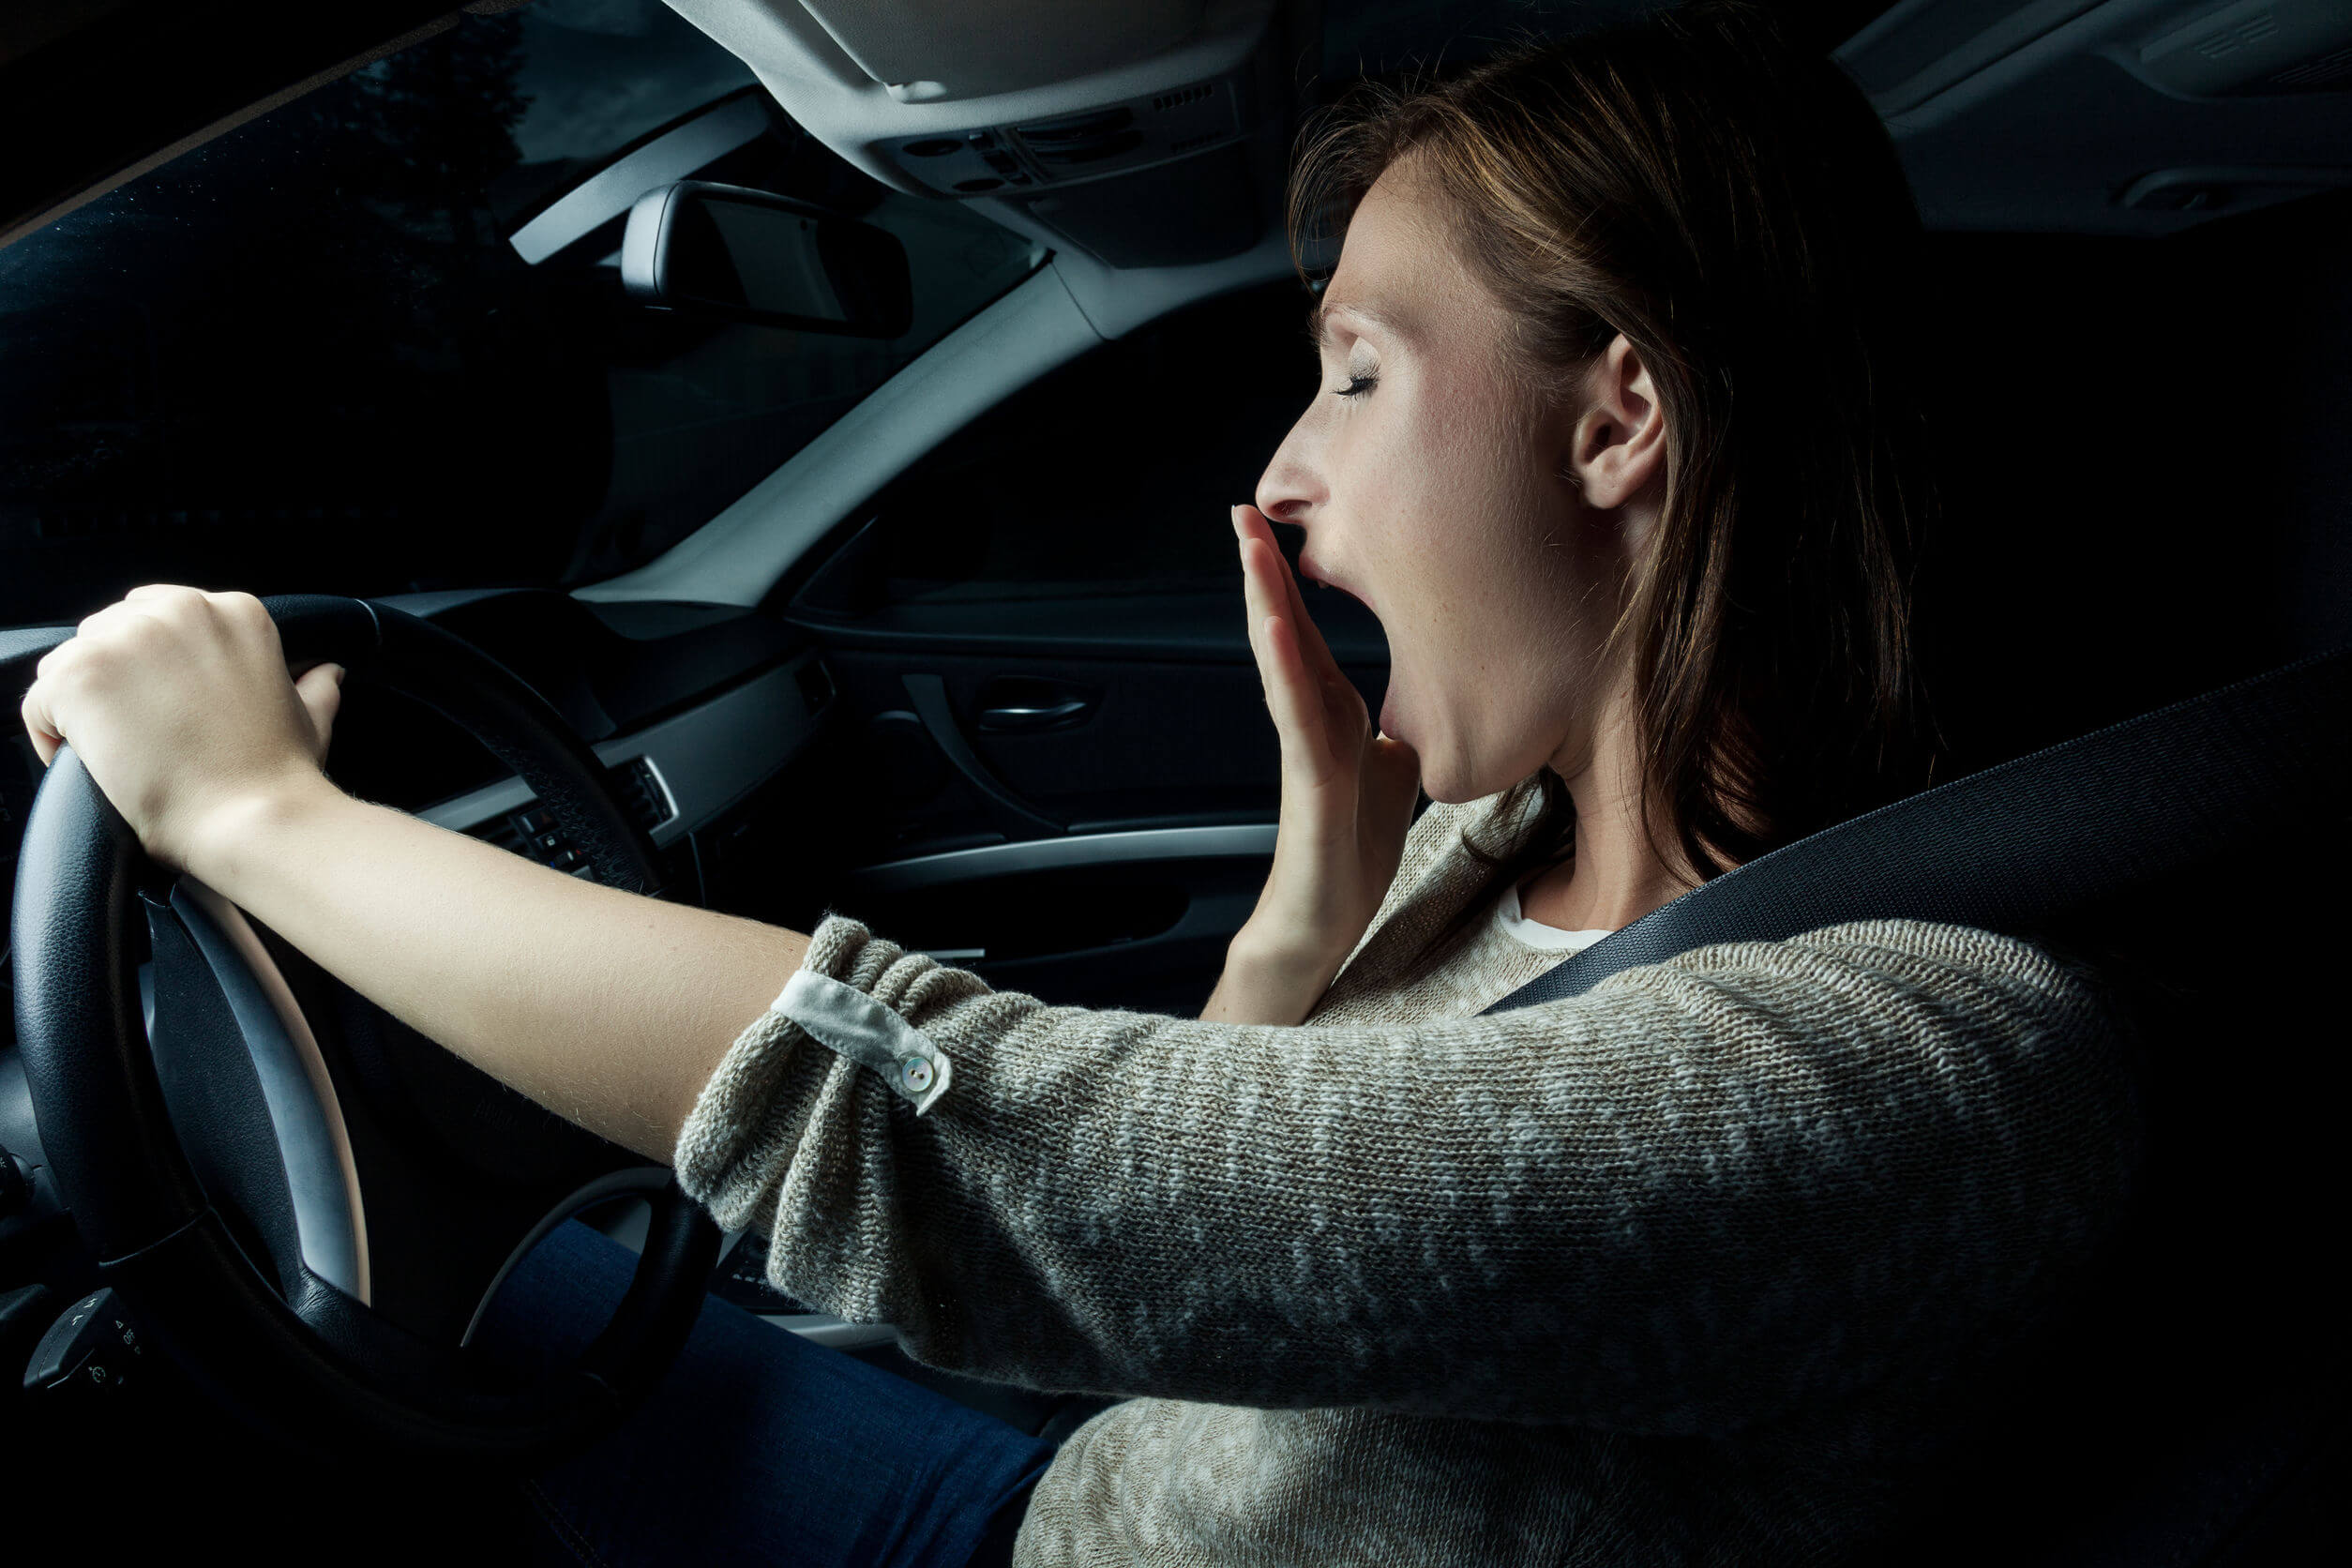 A woman yawning while driving.